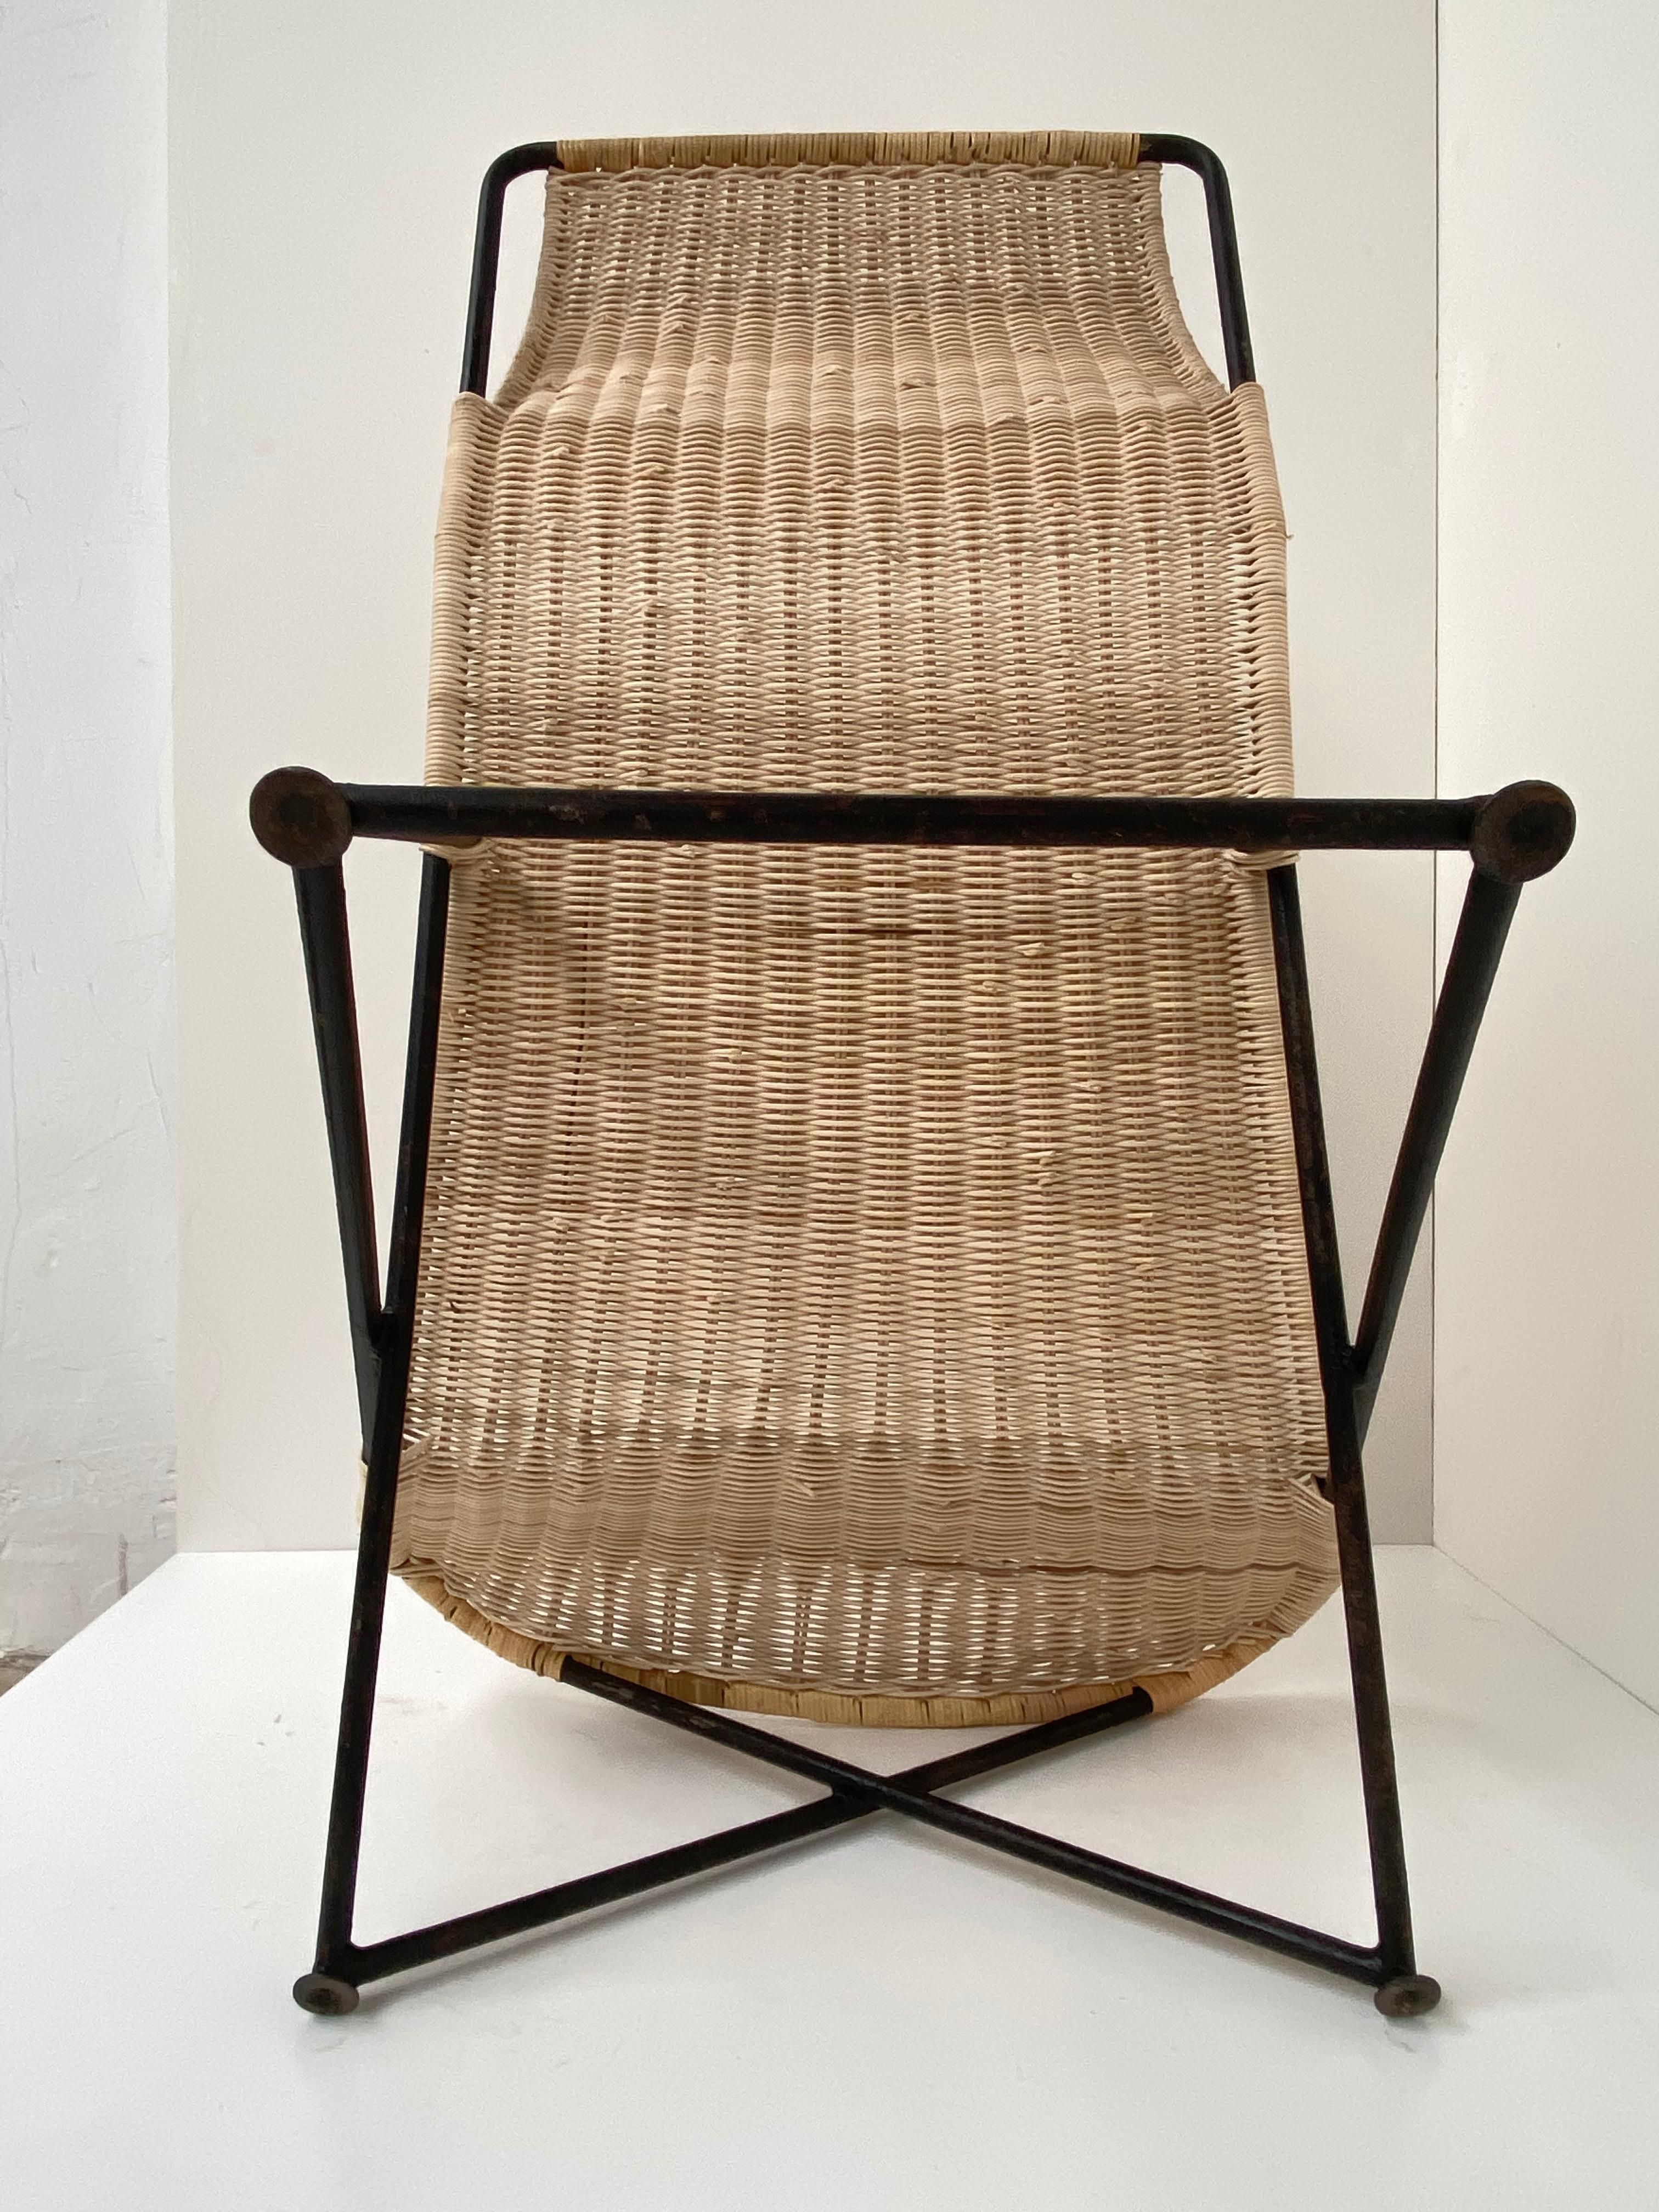 Stunning Sculptural Form Wicker Chaise Attributed to Raoul Guys, France, 1950's For Sale 4